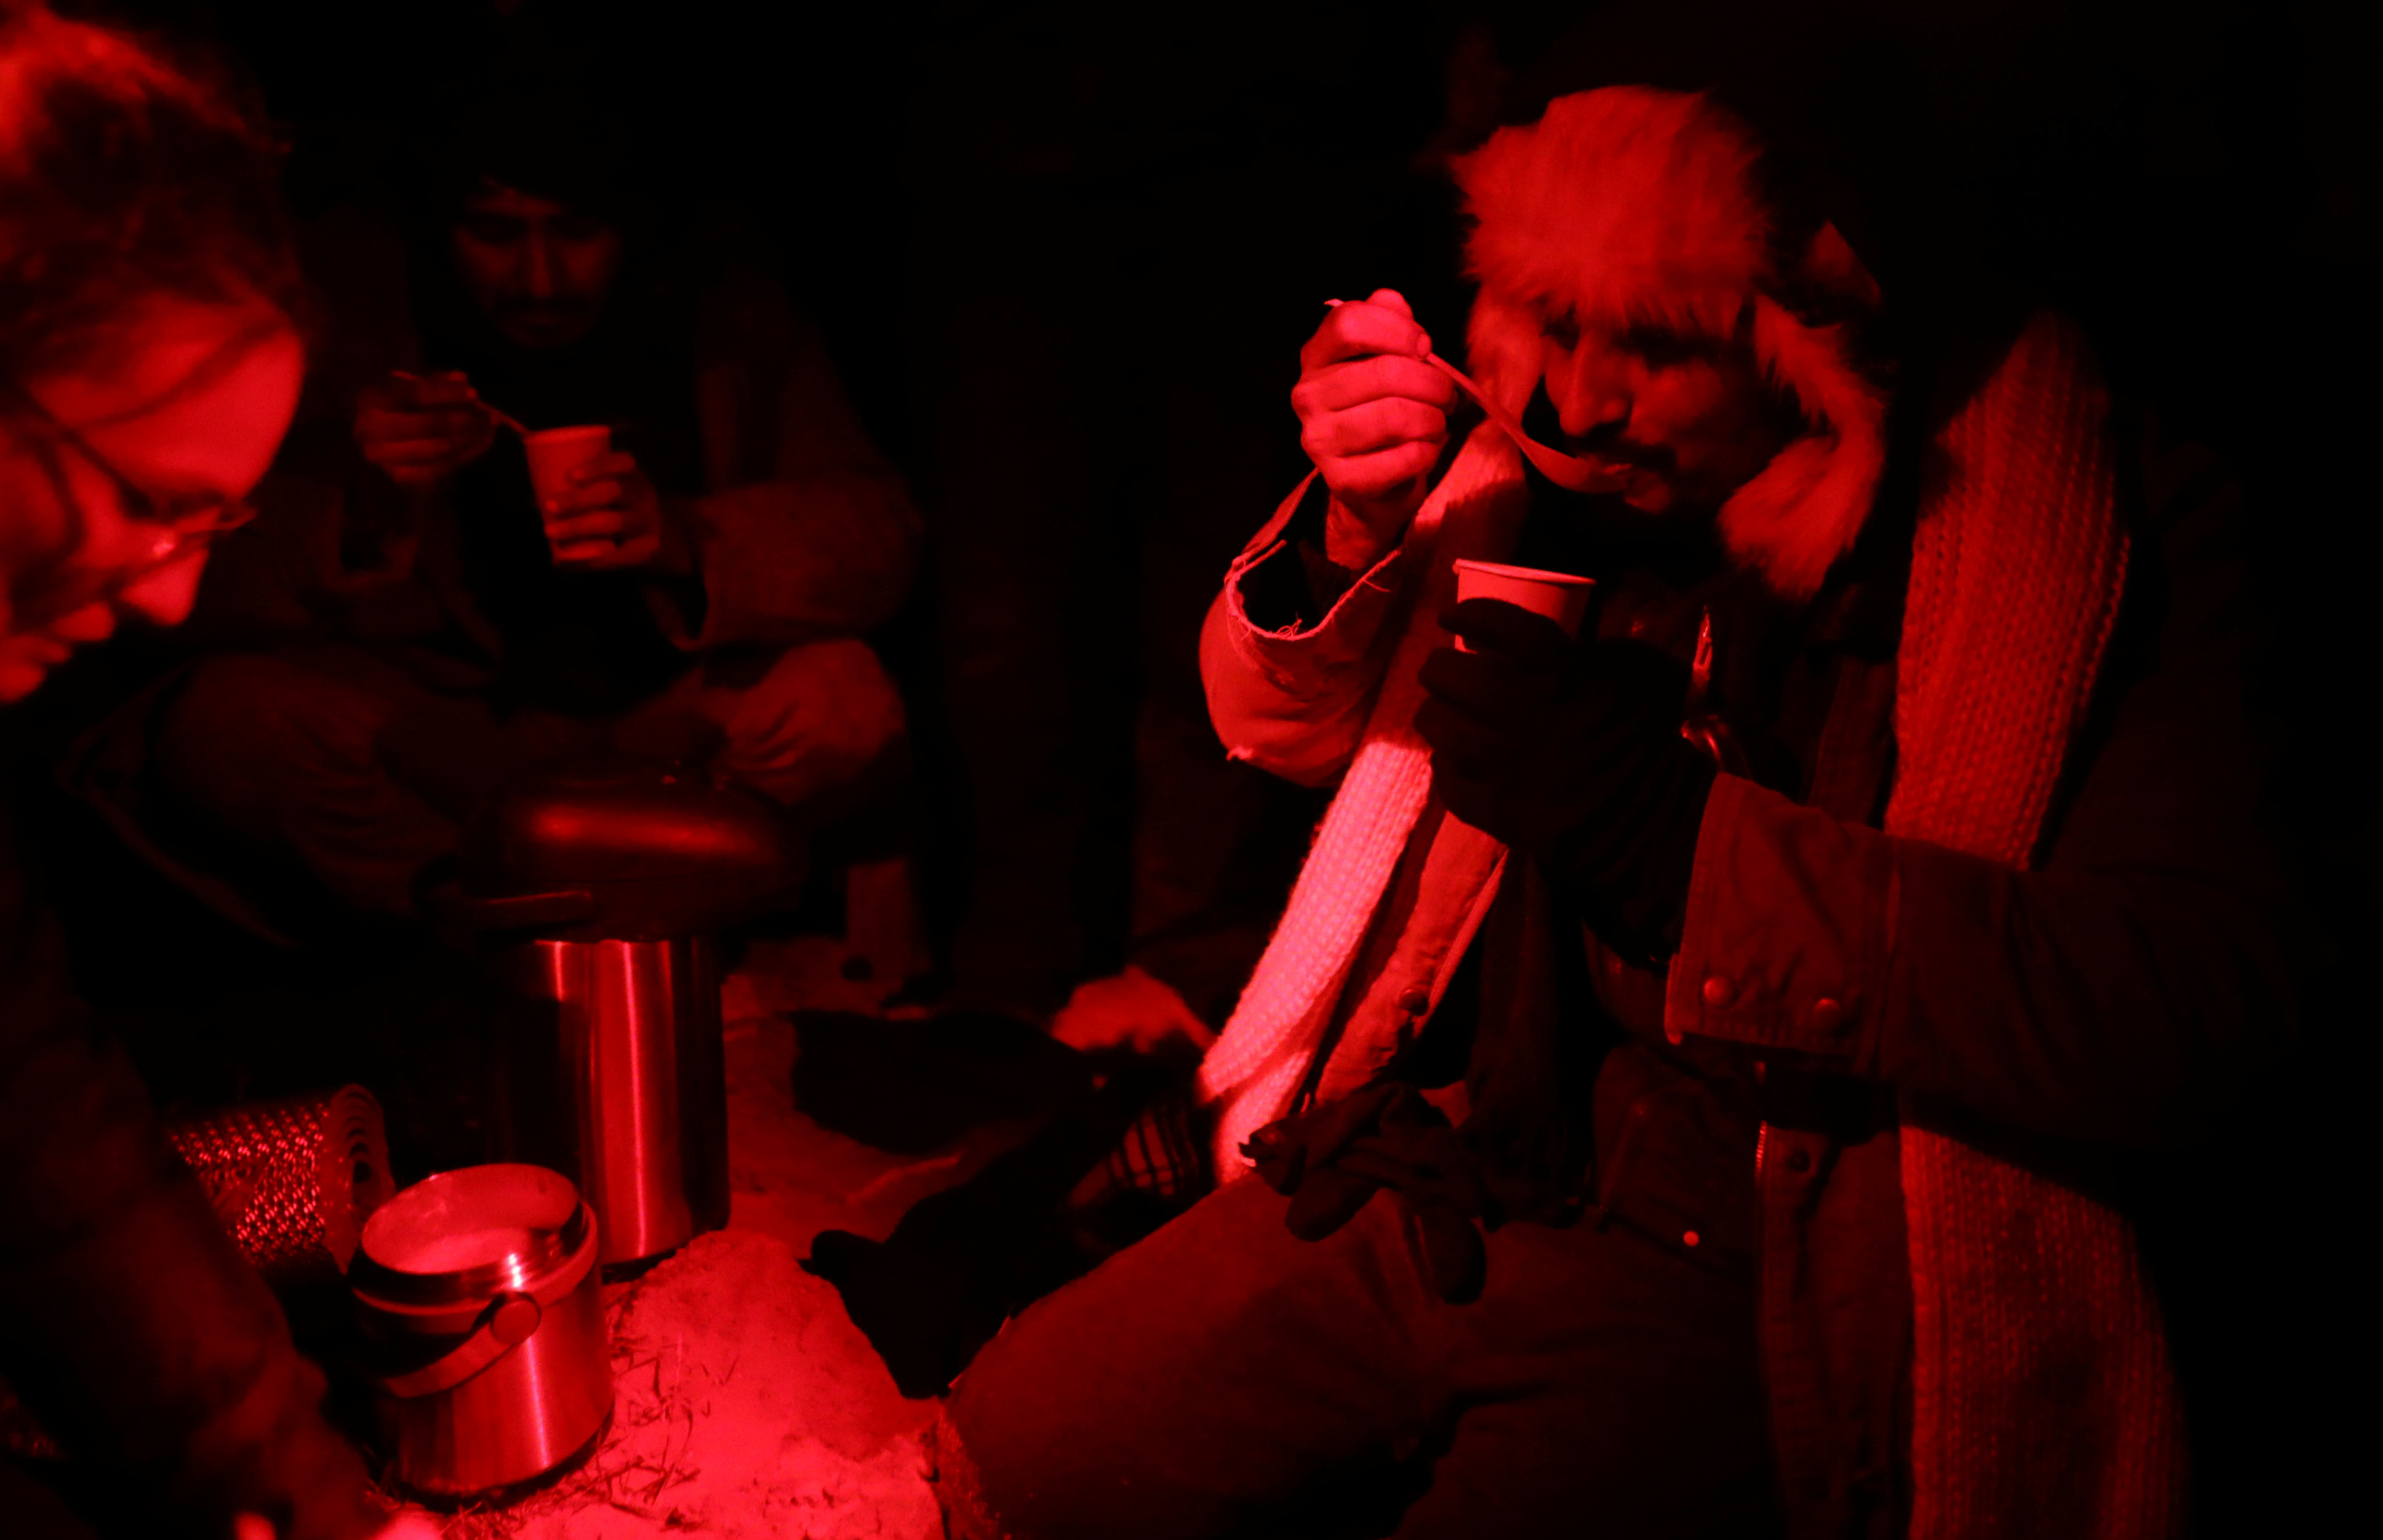 Migrant eats food provided by Ocalenie foundation after he crossed Belarusian-Polish border in the woods near Sokolka